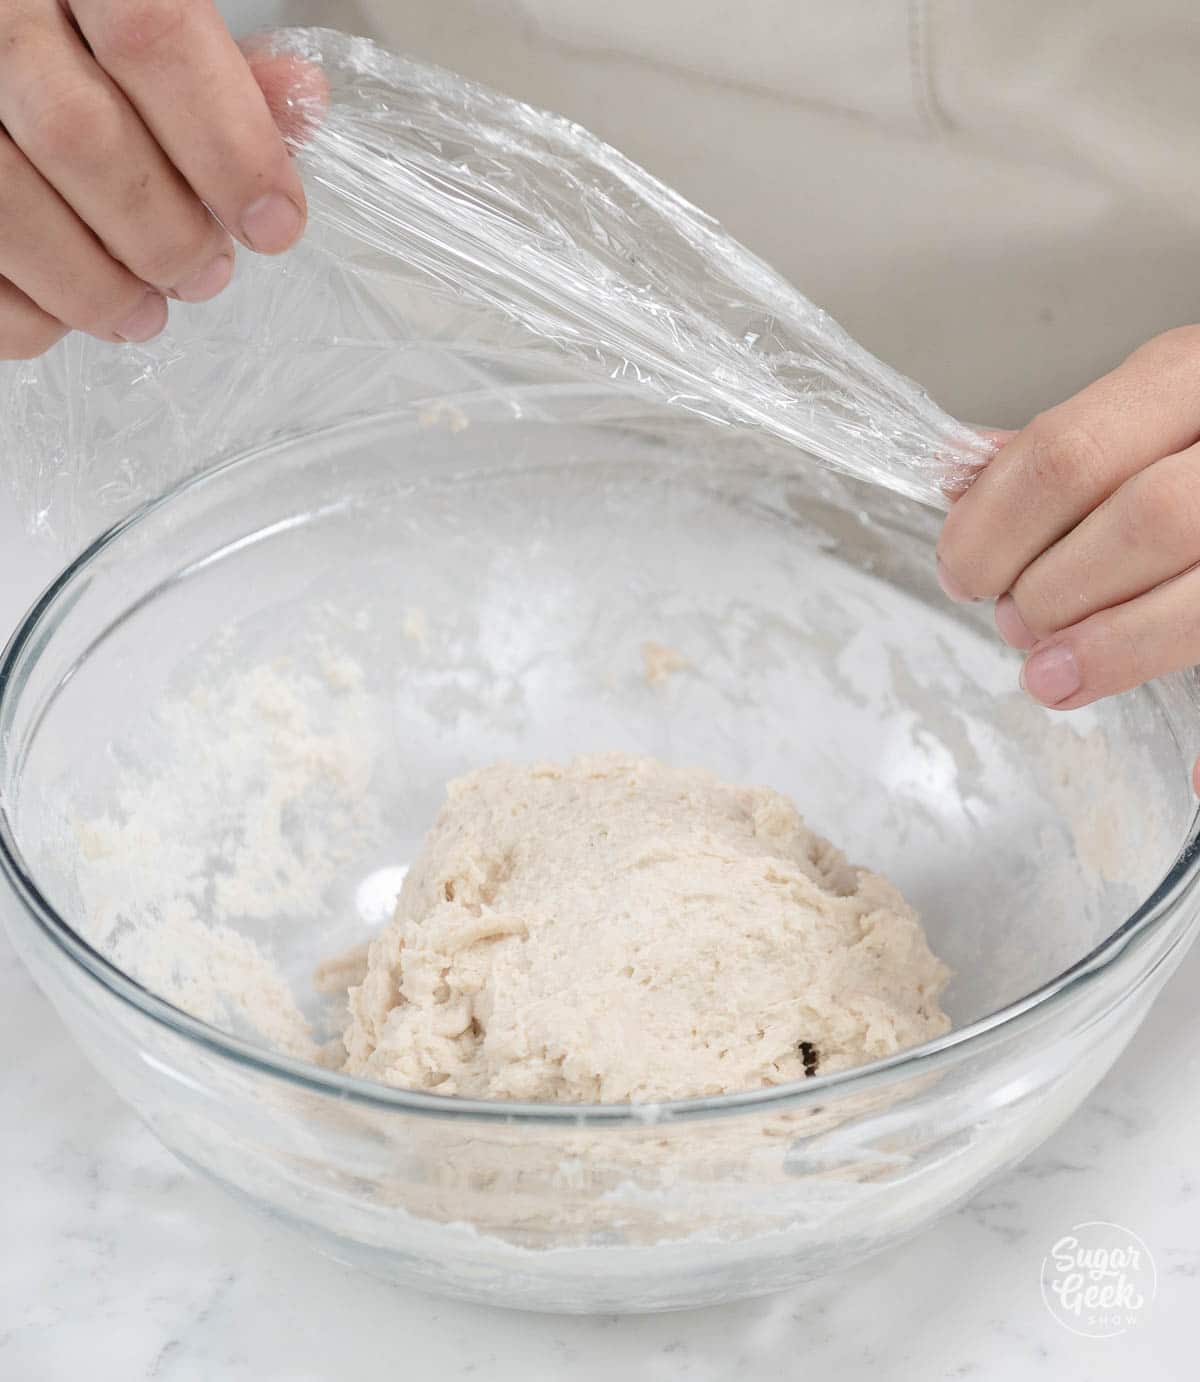 hands holding plastic wrap over dough in a clear bowl